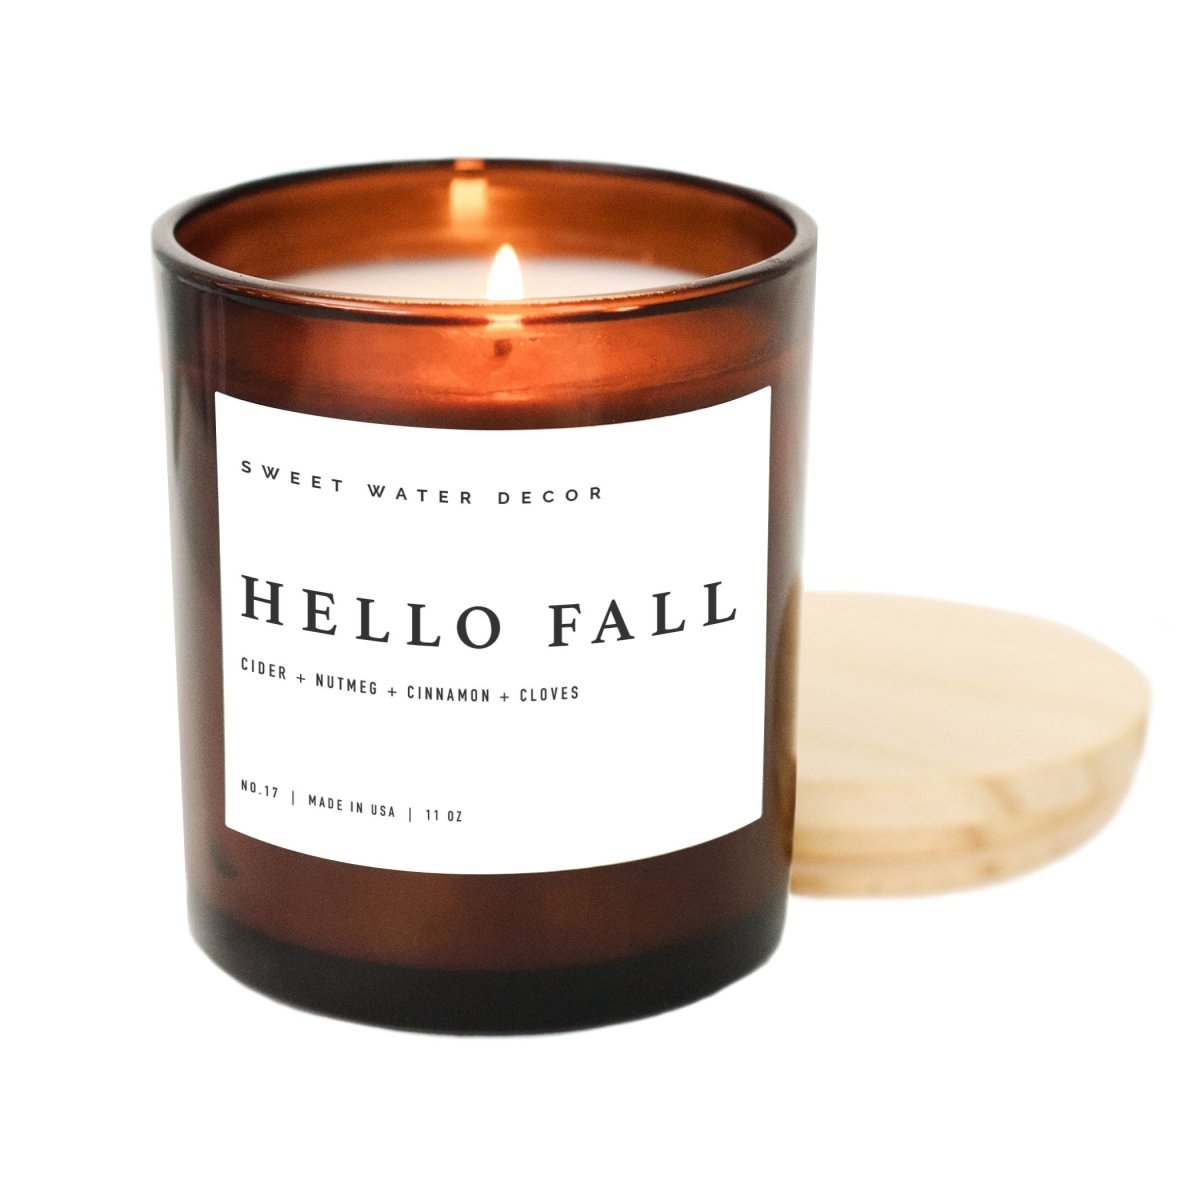 Sweet Water Decor Hello Fall Soy Candle - Amber Jar - 11 oz - lily & onyx